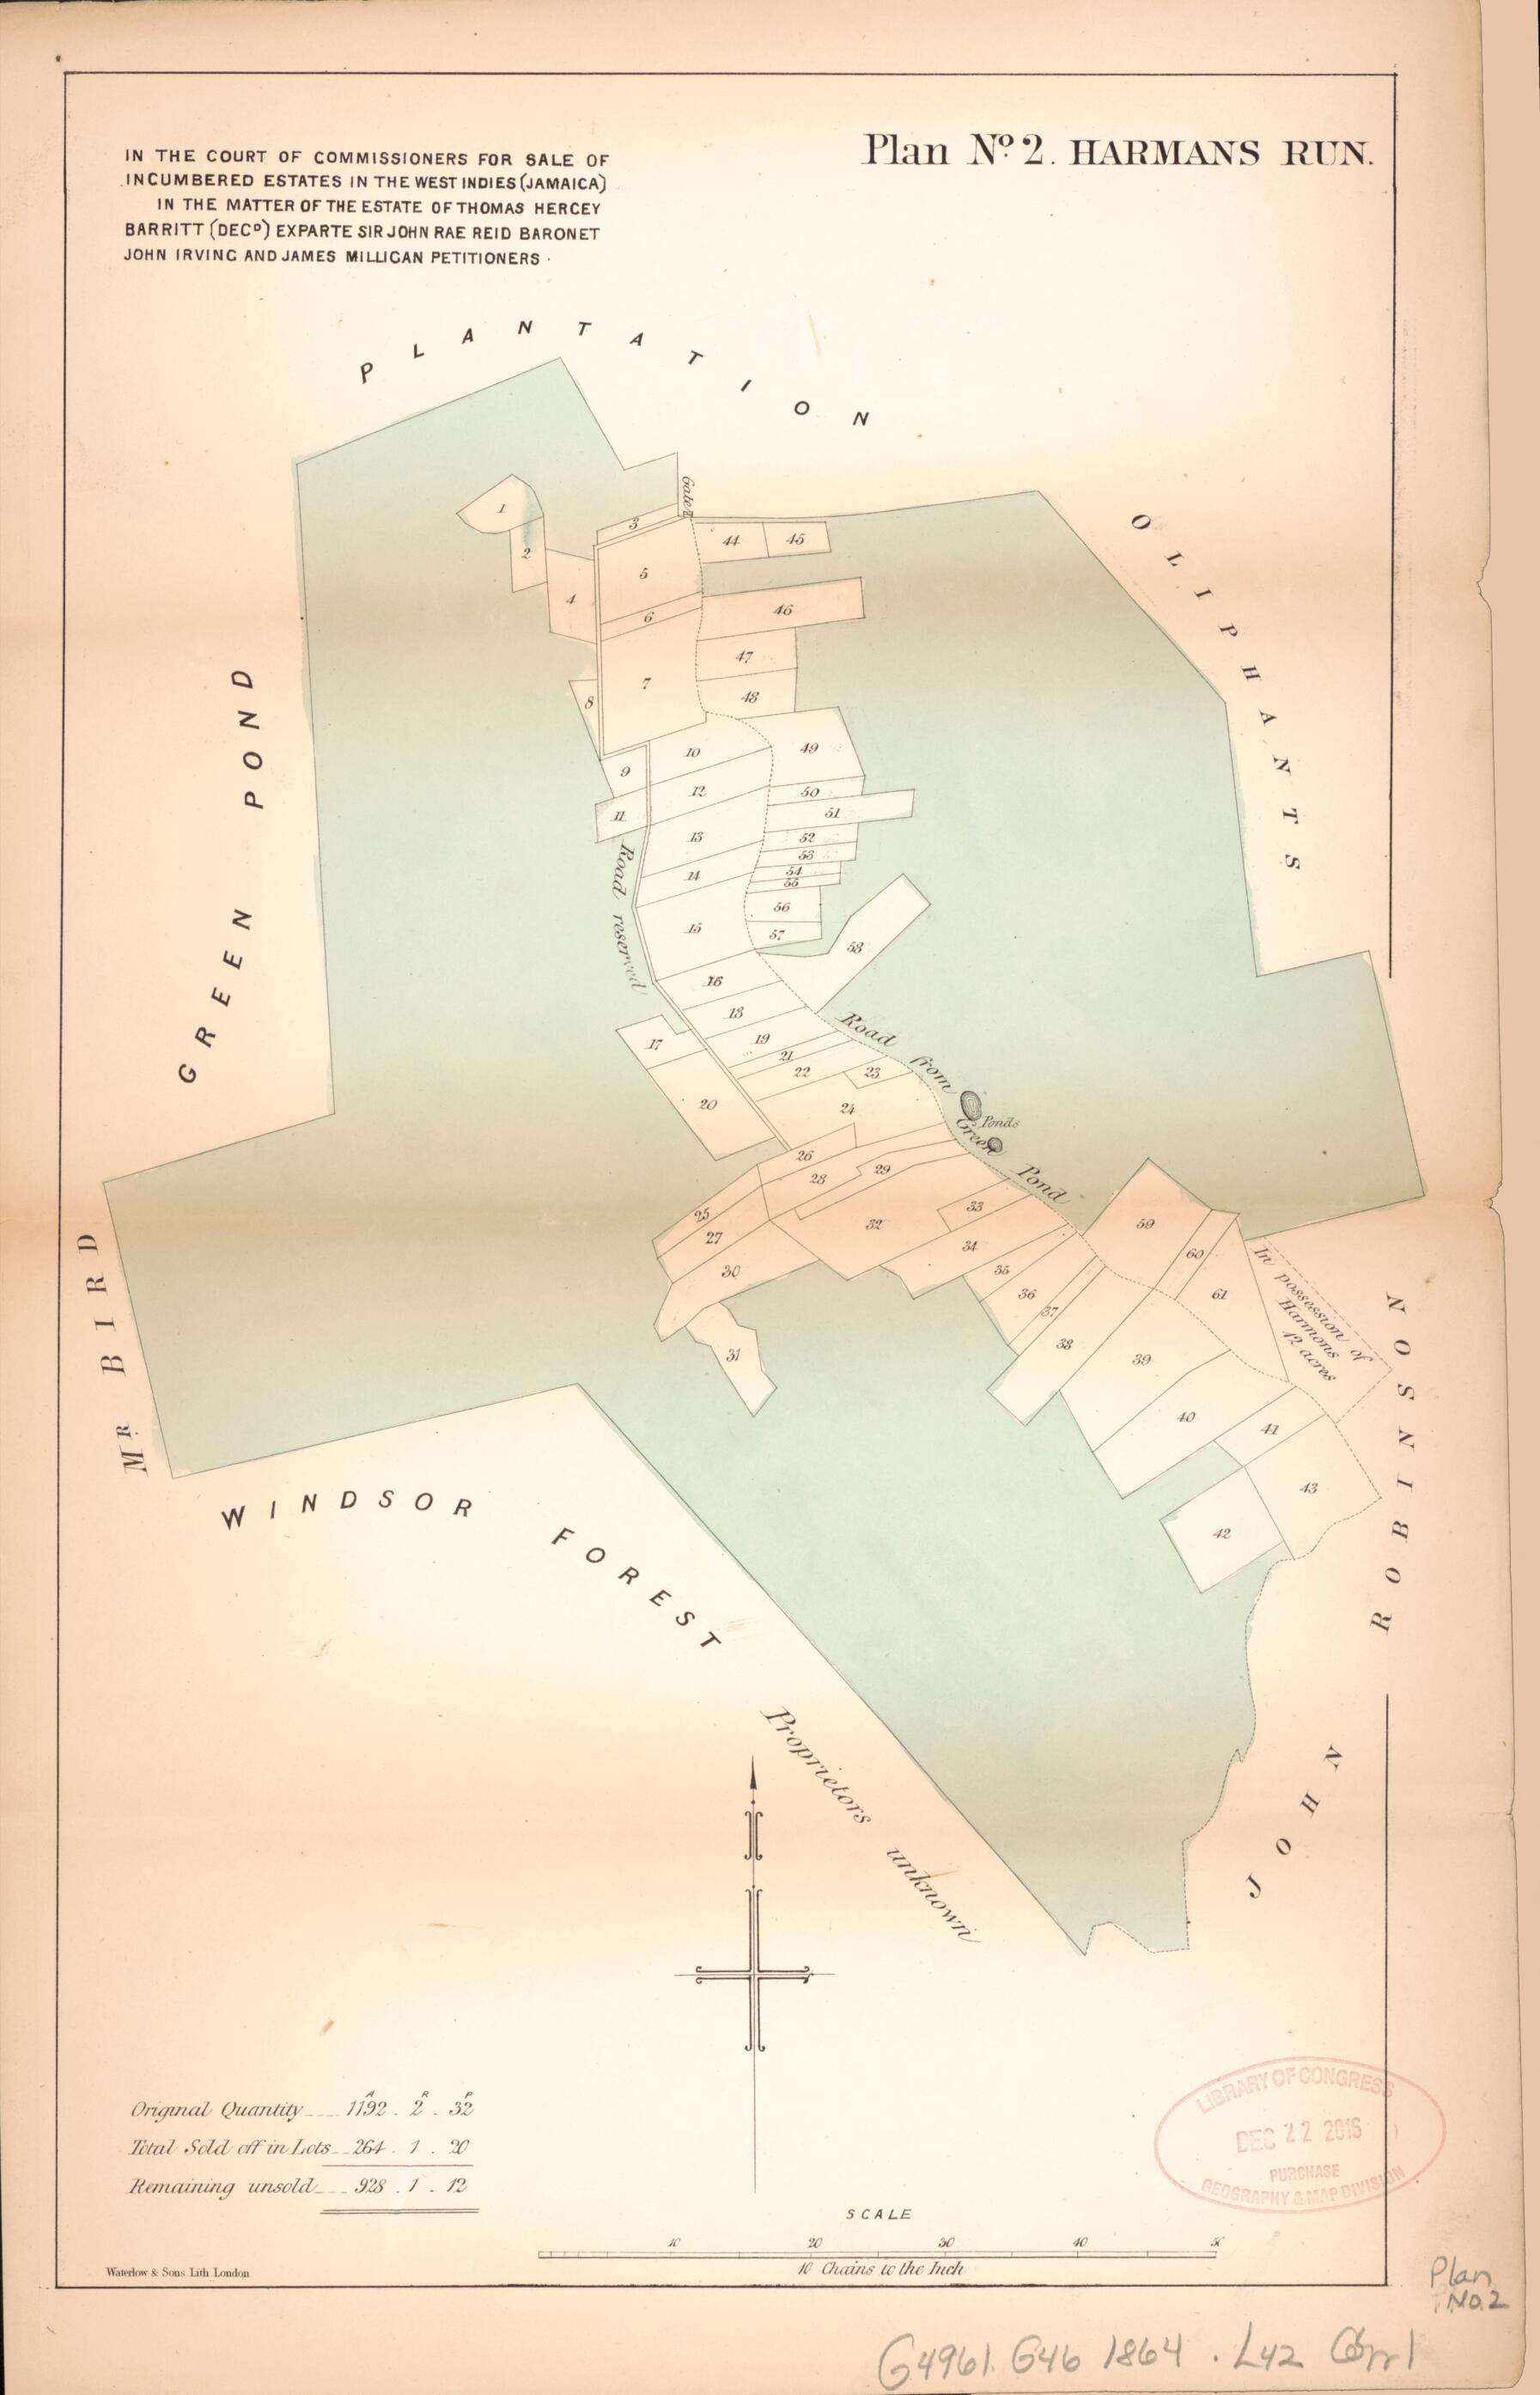 This old map of Plan No. 2. Harmans Run from Encumbered Estates In the West Indies (Jamaica) from 1864 was created by Henry James Stonor in 1864